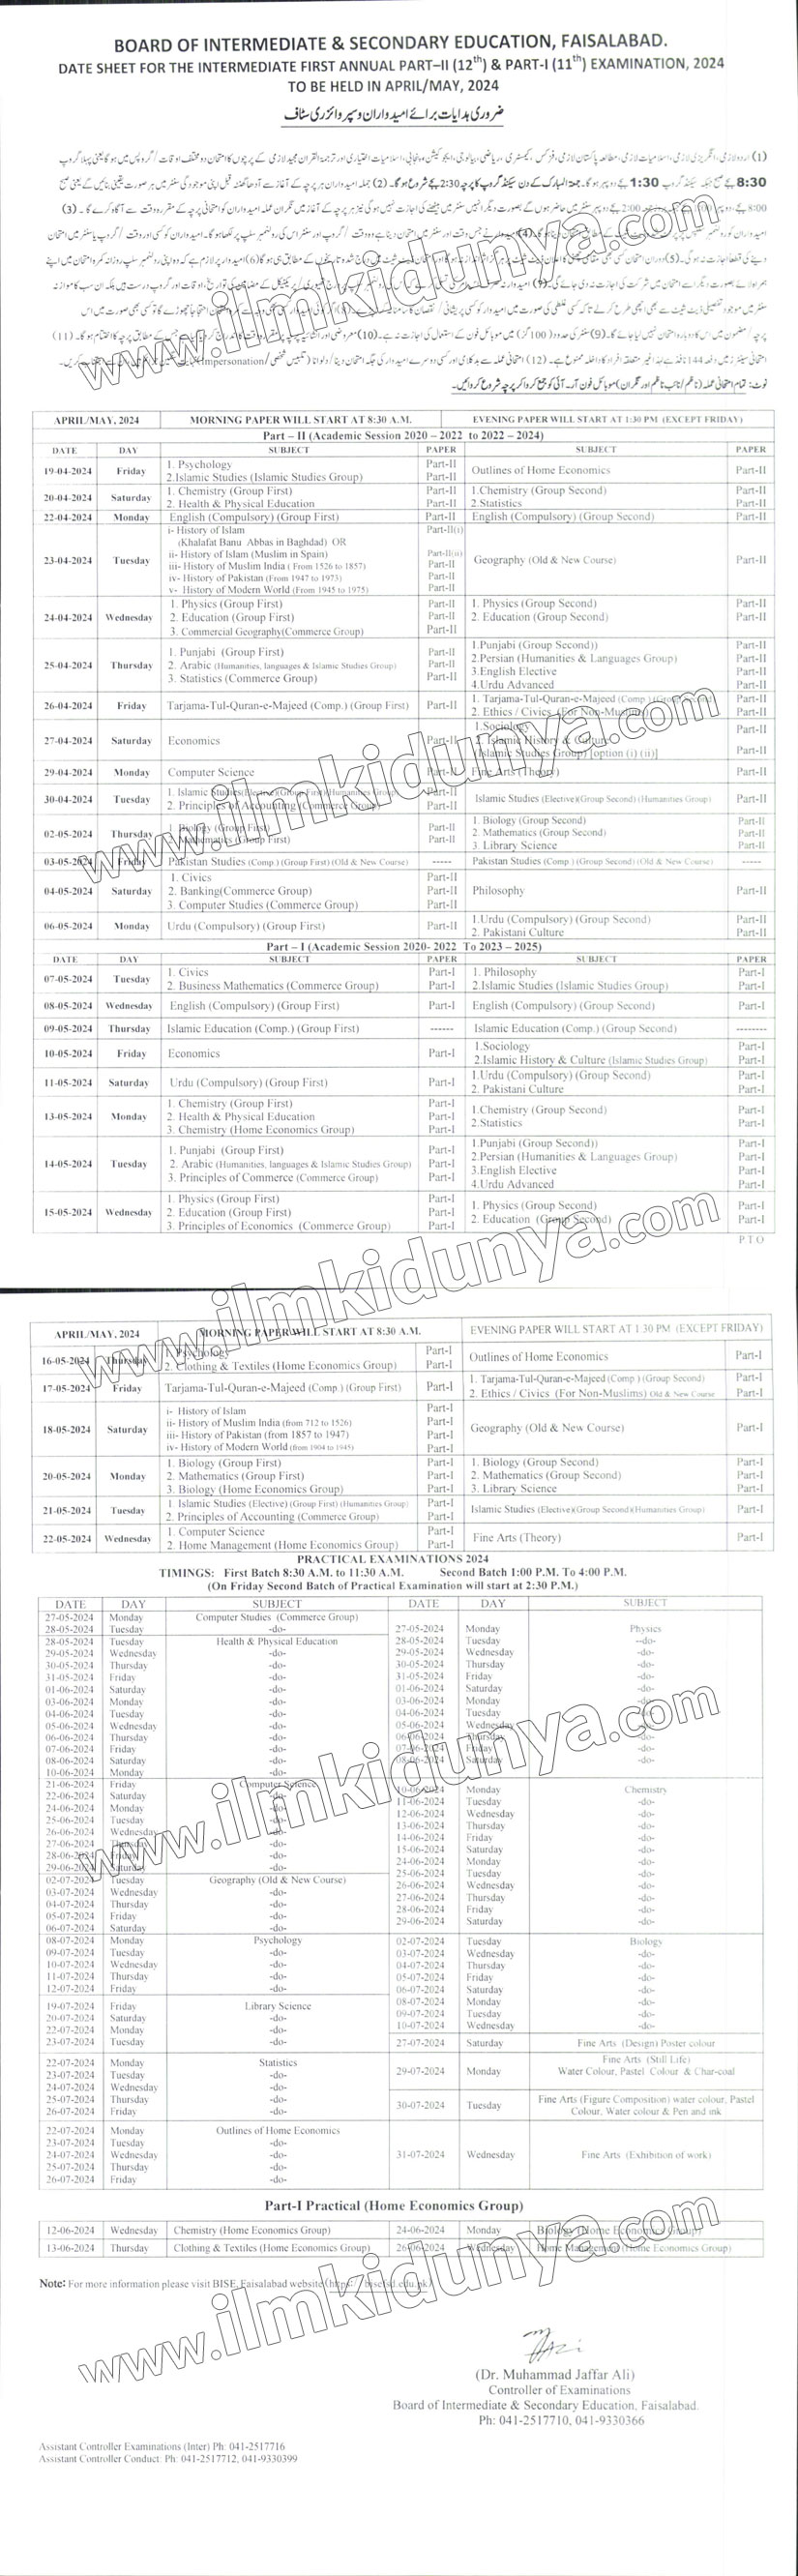 DATE SHEET INTERMEDIATE FIRST ANNUAL EXAMINATION 2024 Faisalabad (1) page 0001